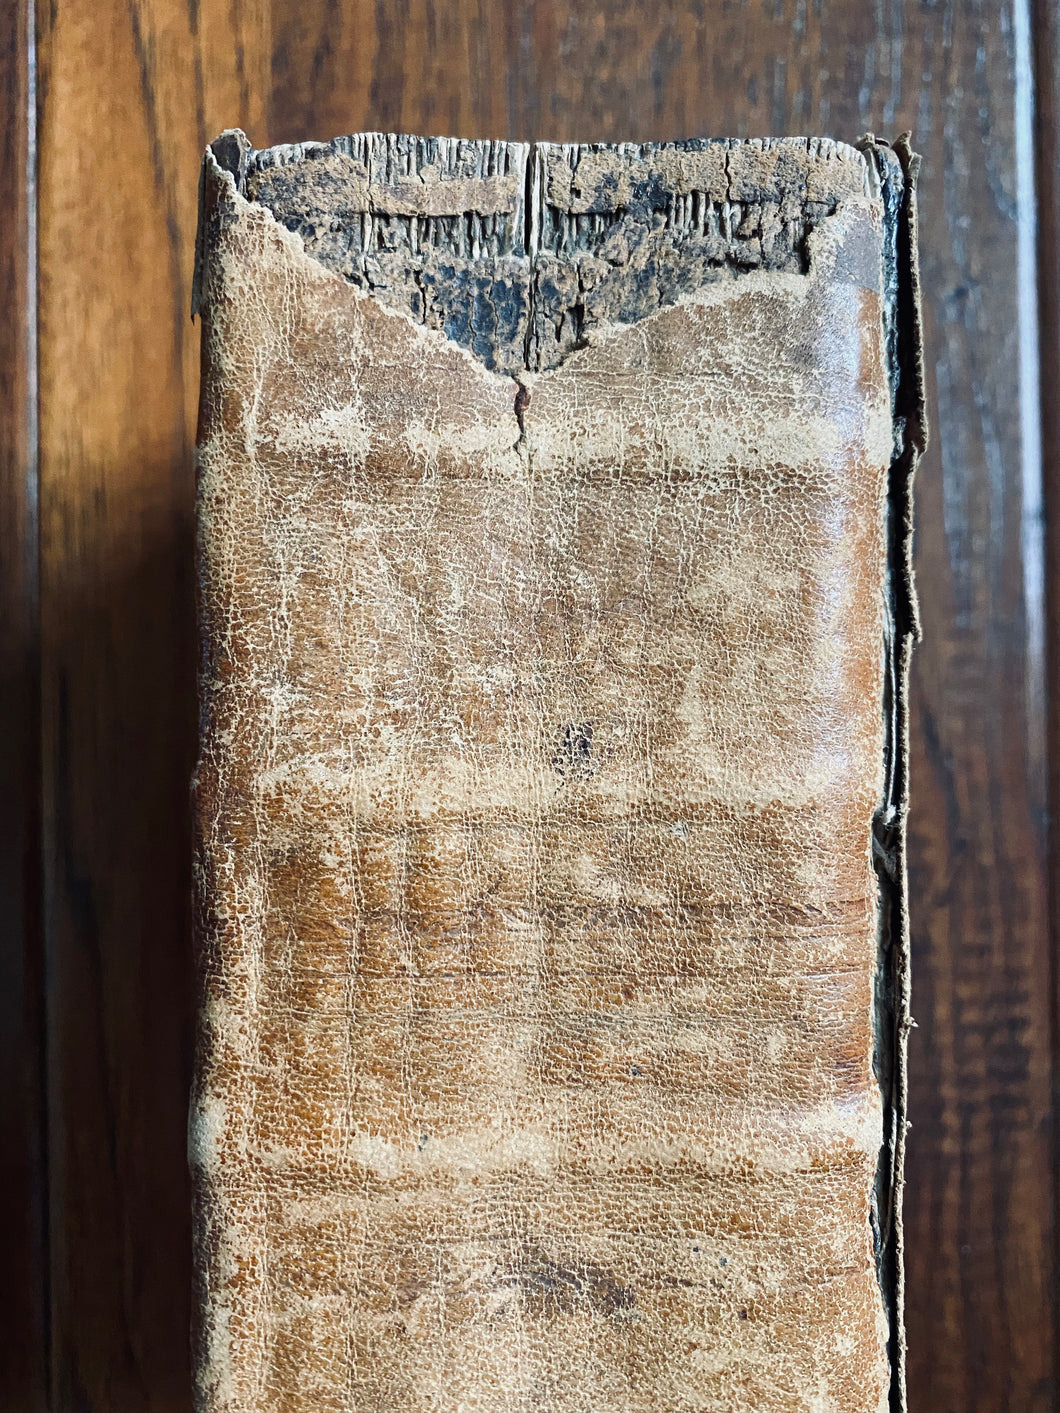 1653 SEPTUAGINT. First English Edition of the Septuagint Ever Published!